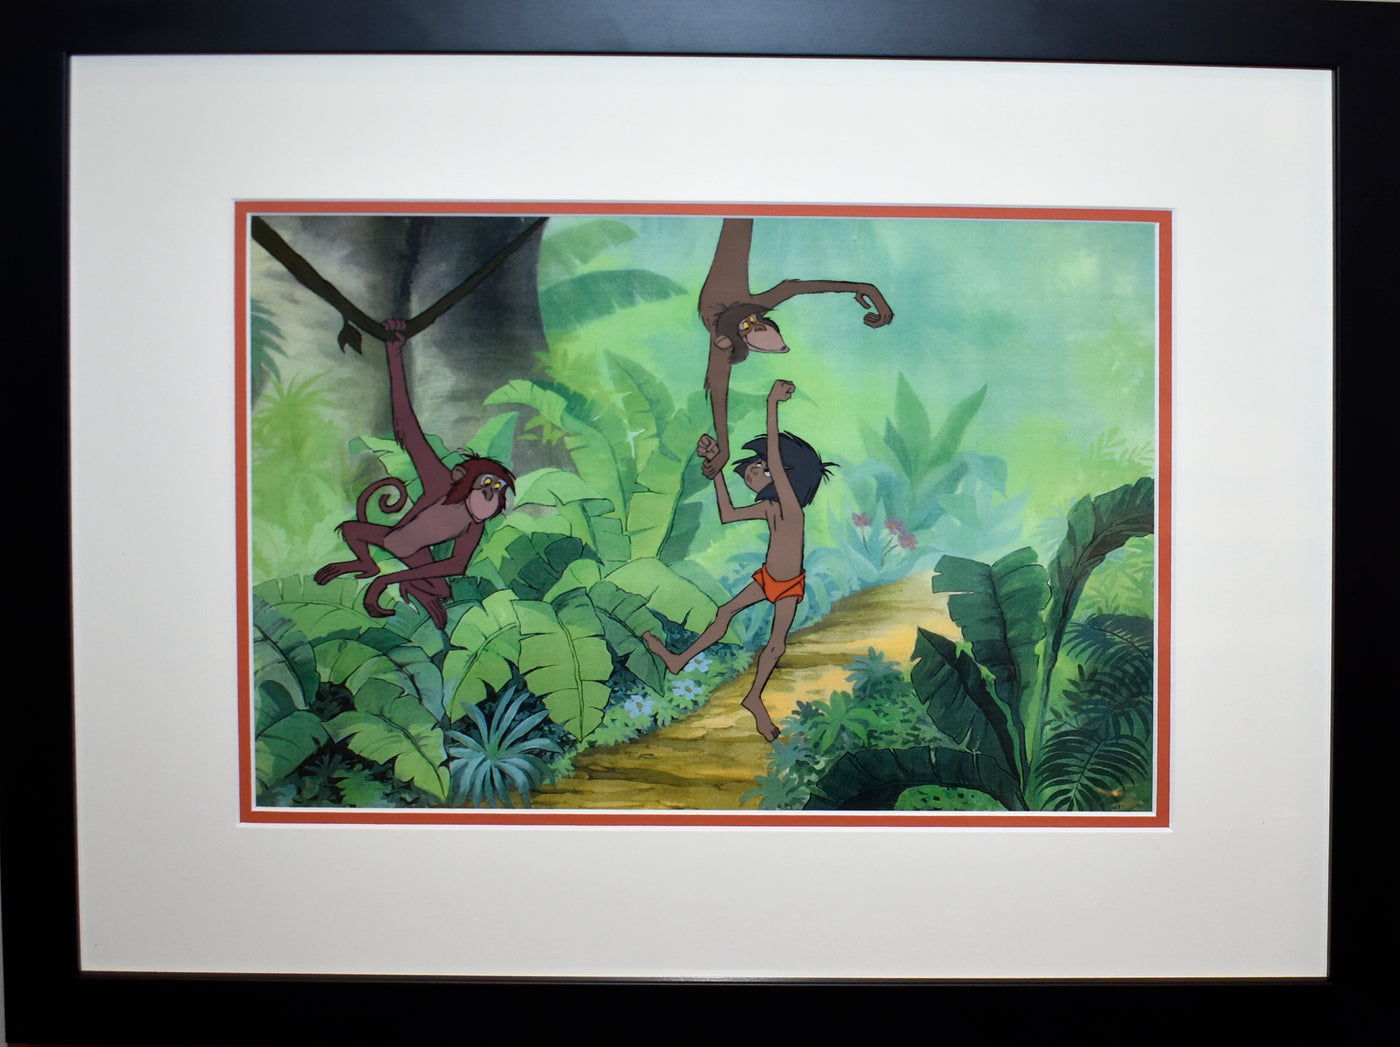 Original Walt Disney Production Cel with Color Copy Background from The Jungle Book featuring Mowgli